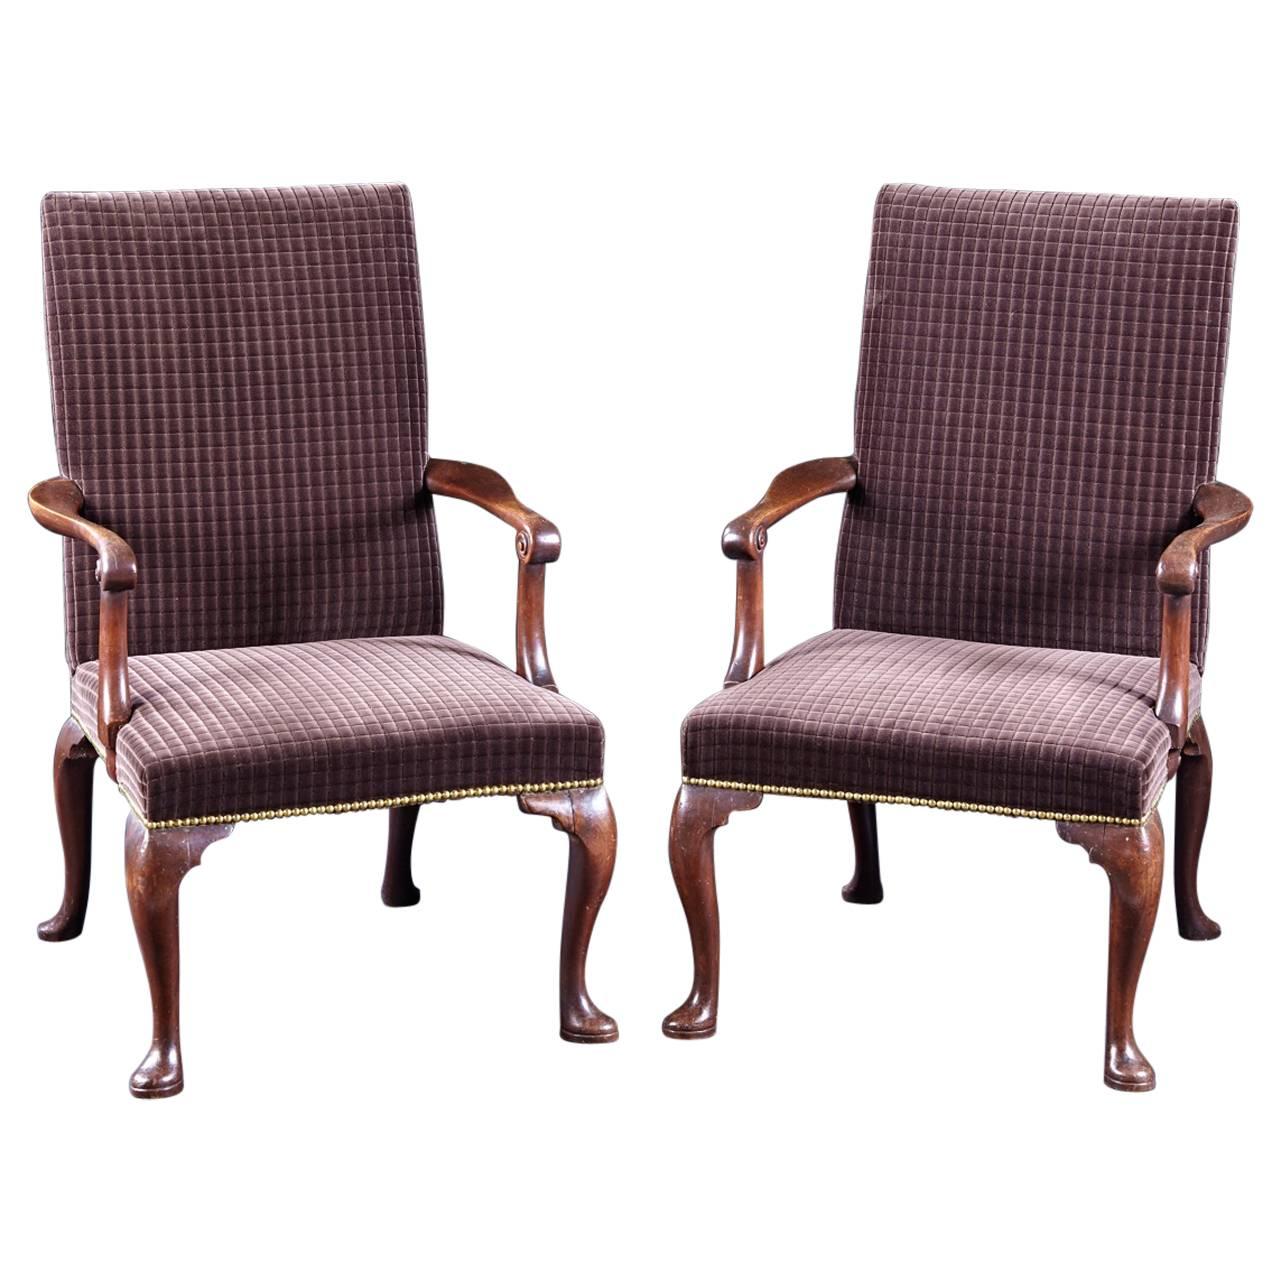 Pair of 18th Century English George II Period Gainsborough Library Armchairs For Sale